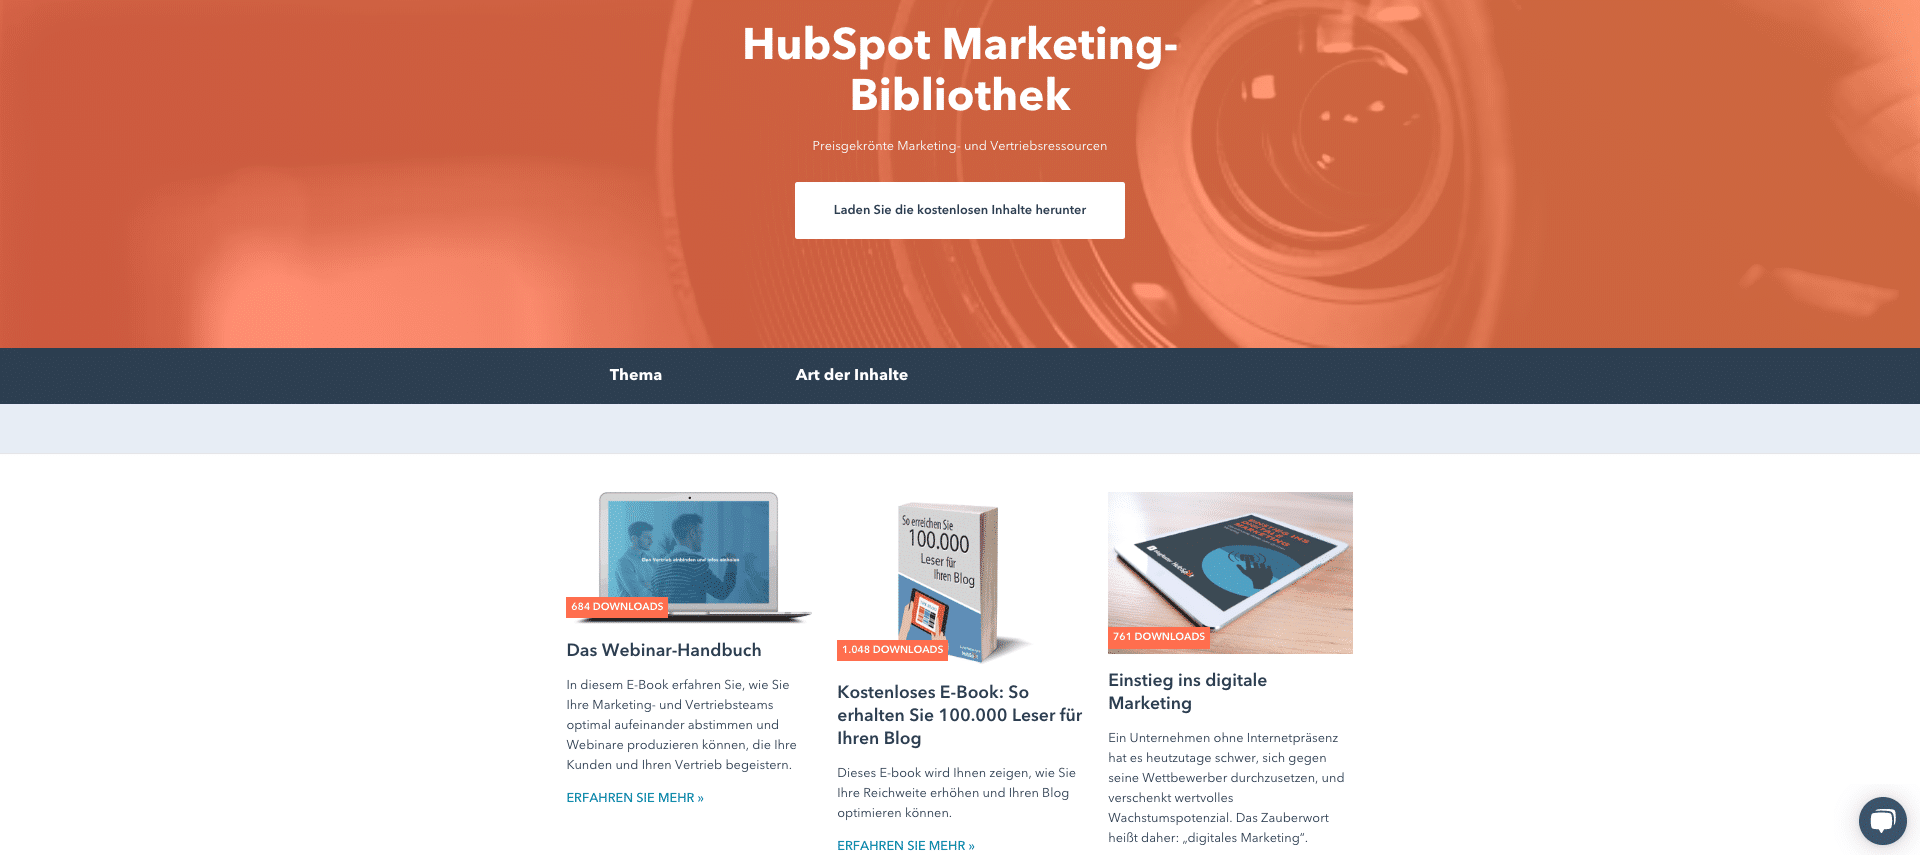 Hubspot - Blogpost, listicle and then? - 13 Digital content formats